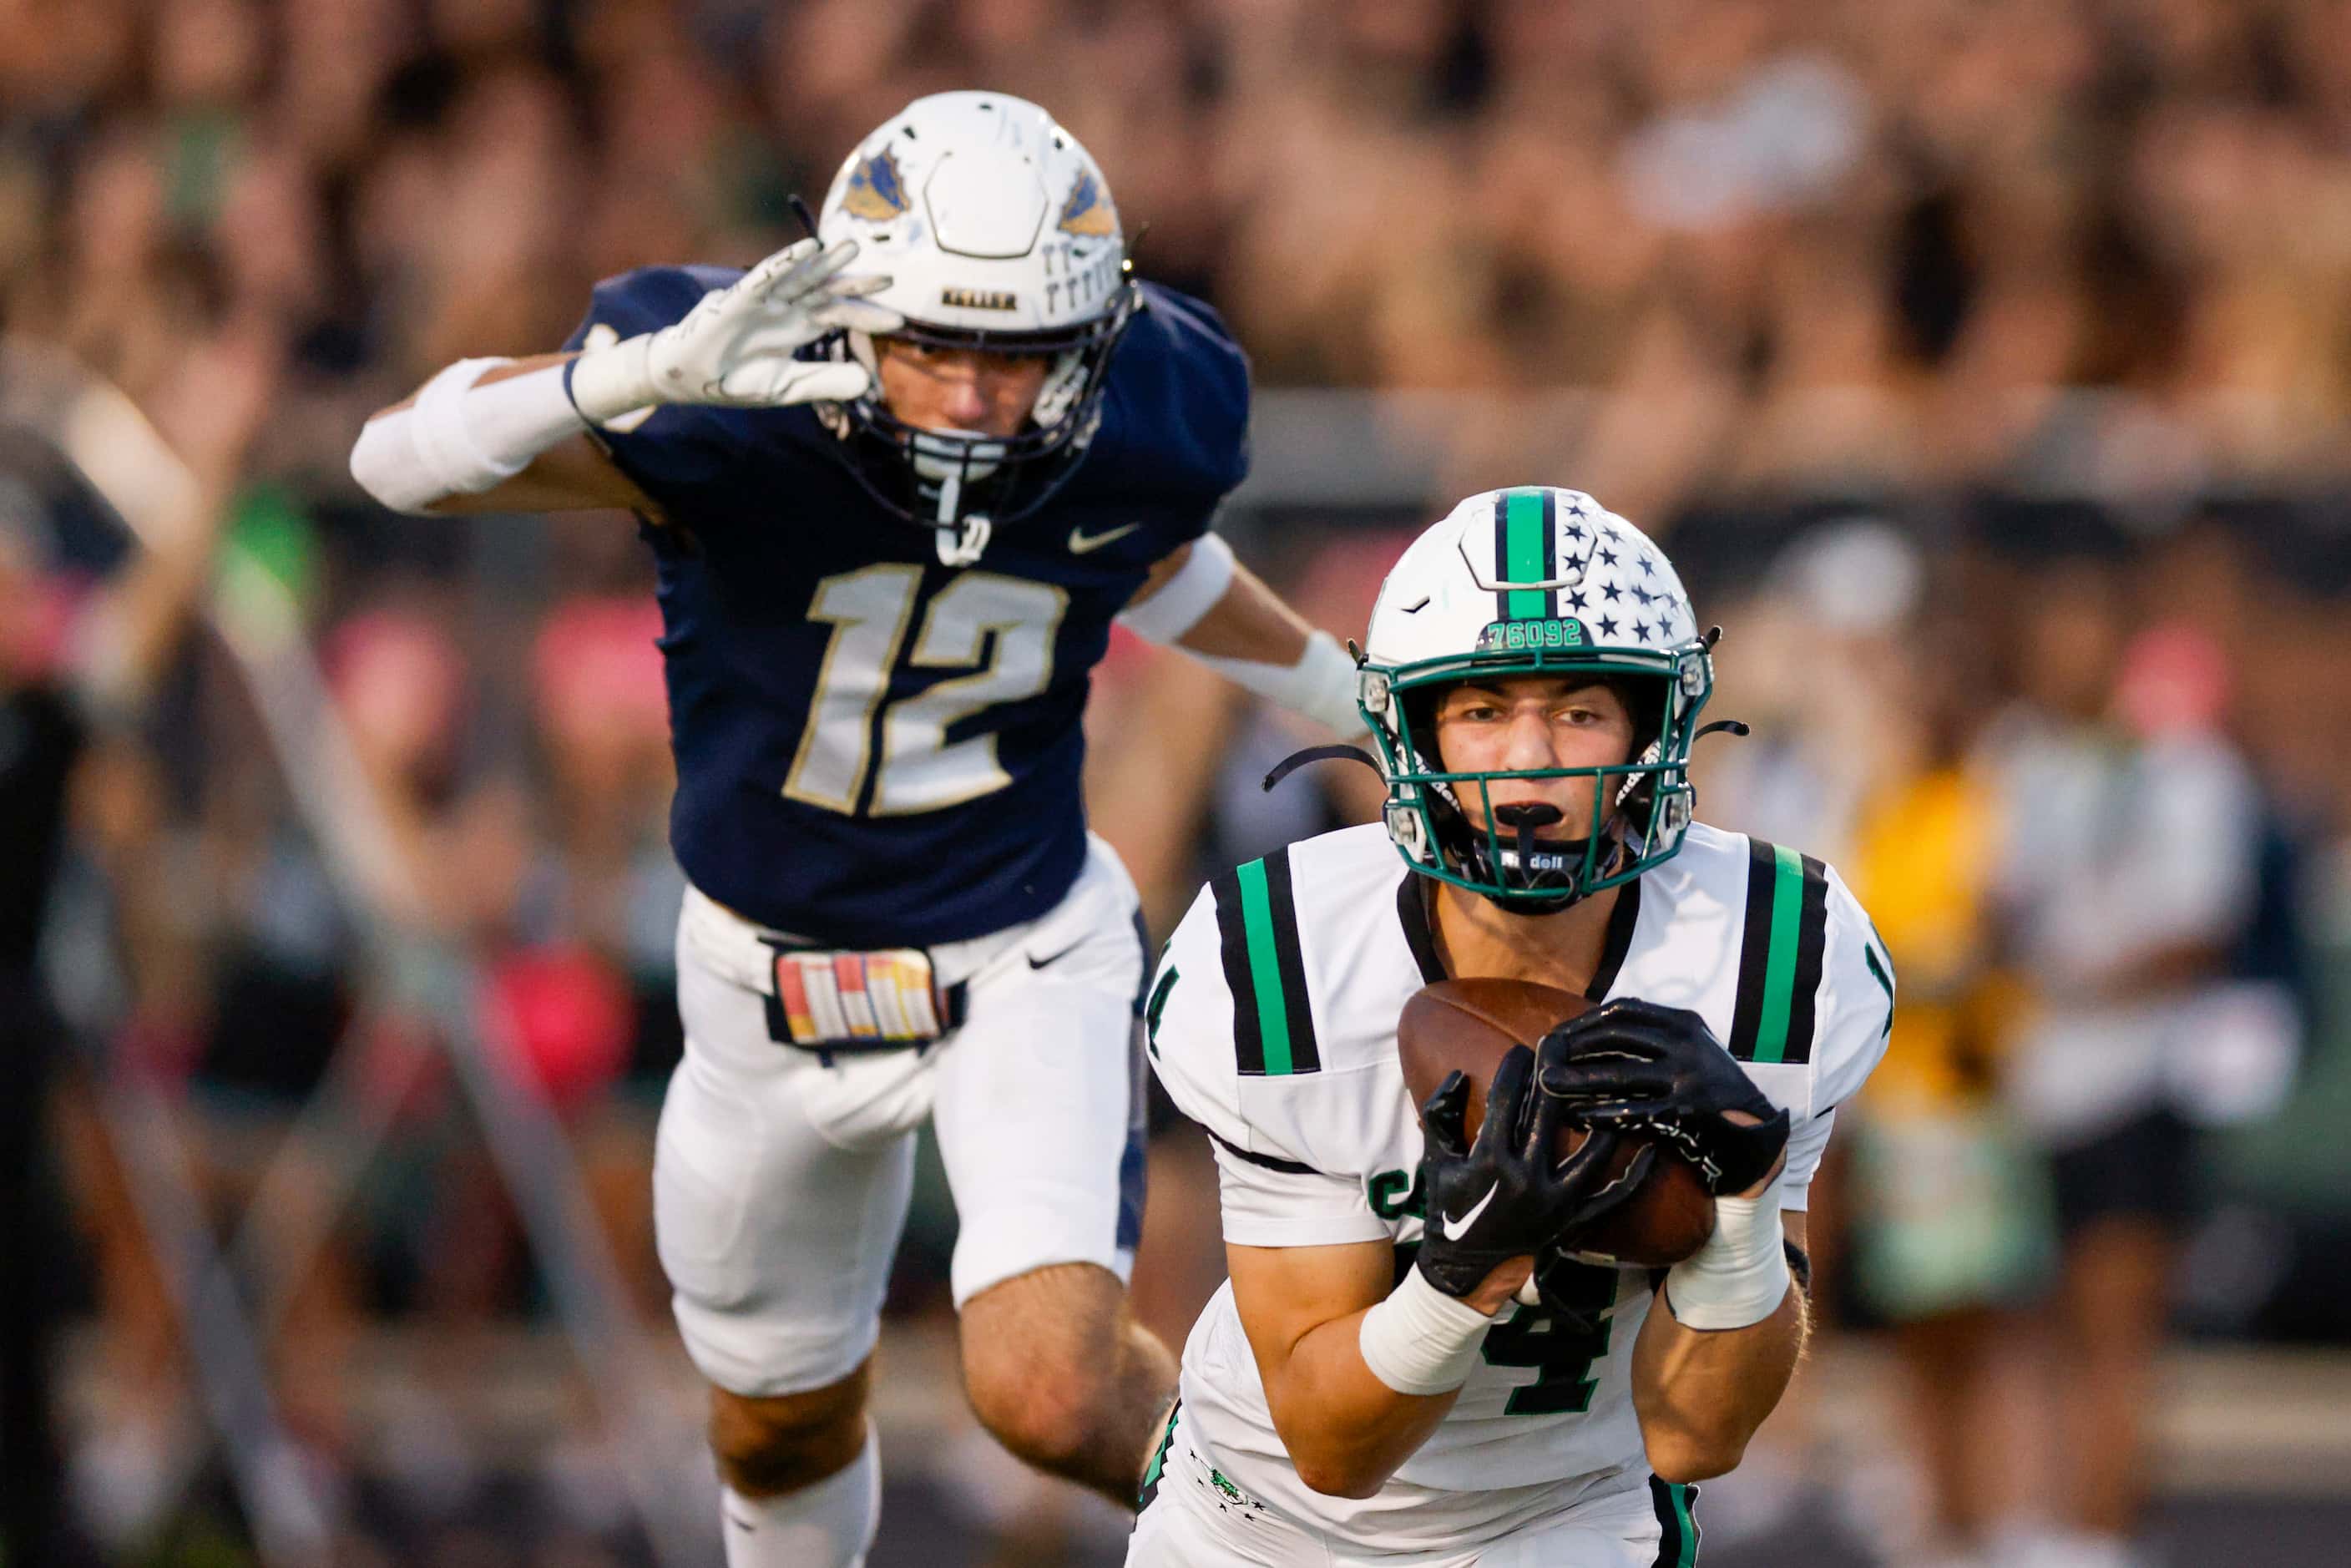 Southlake Carroll wide receiver Clayton Wayland (14) makes a diving catch ahead of Keller...